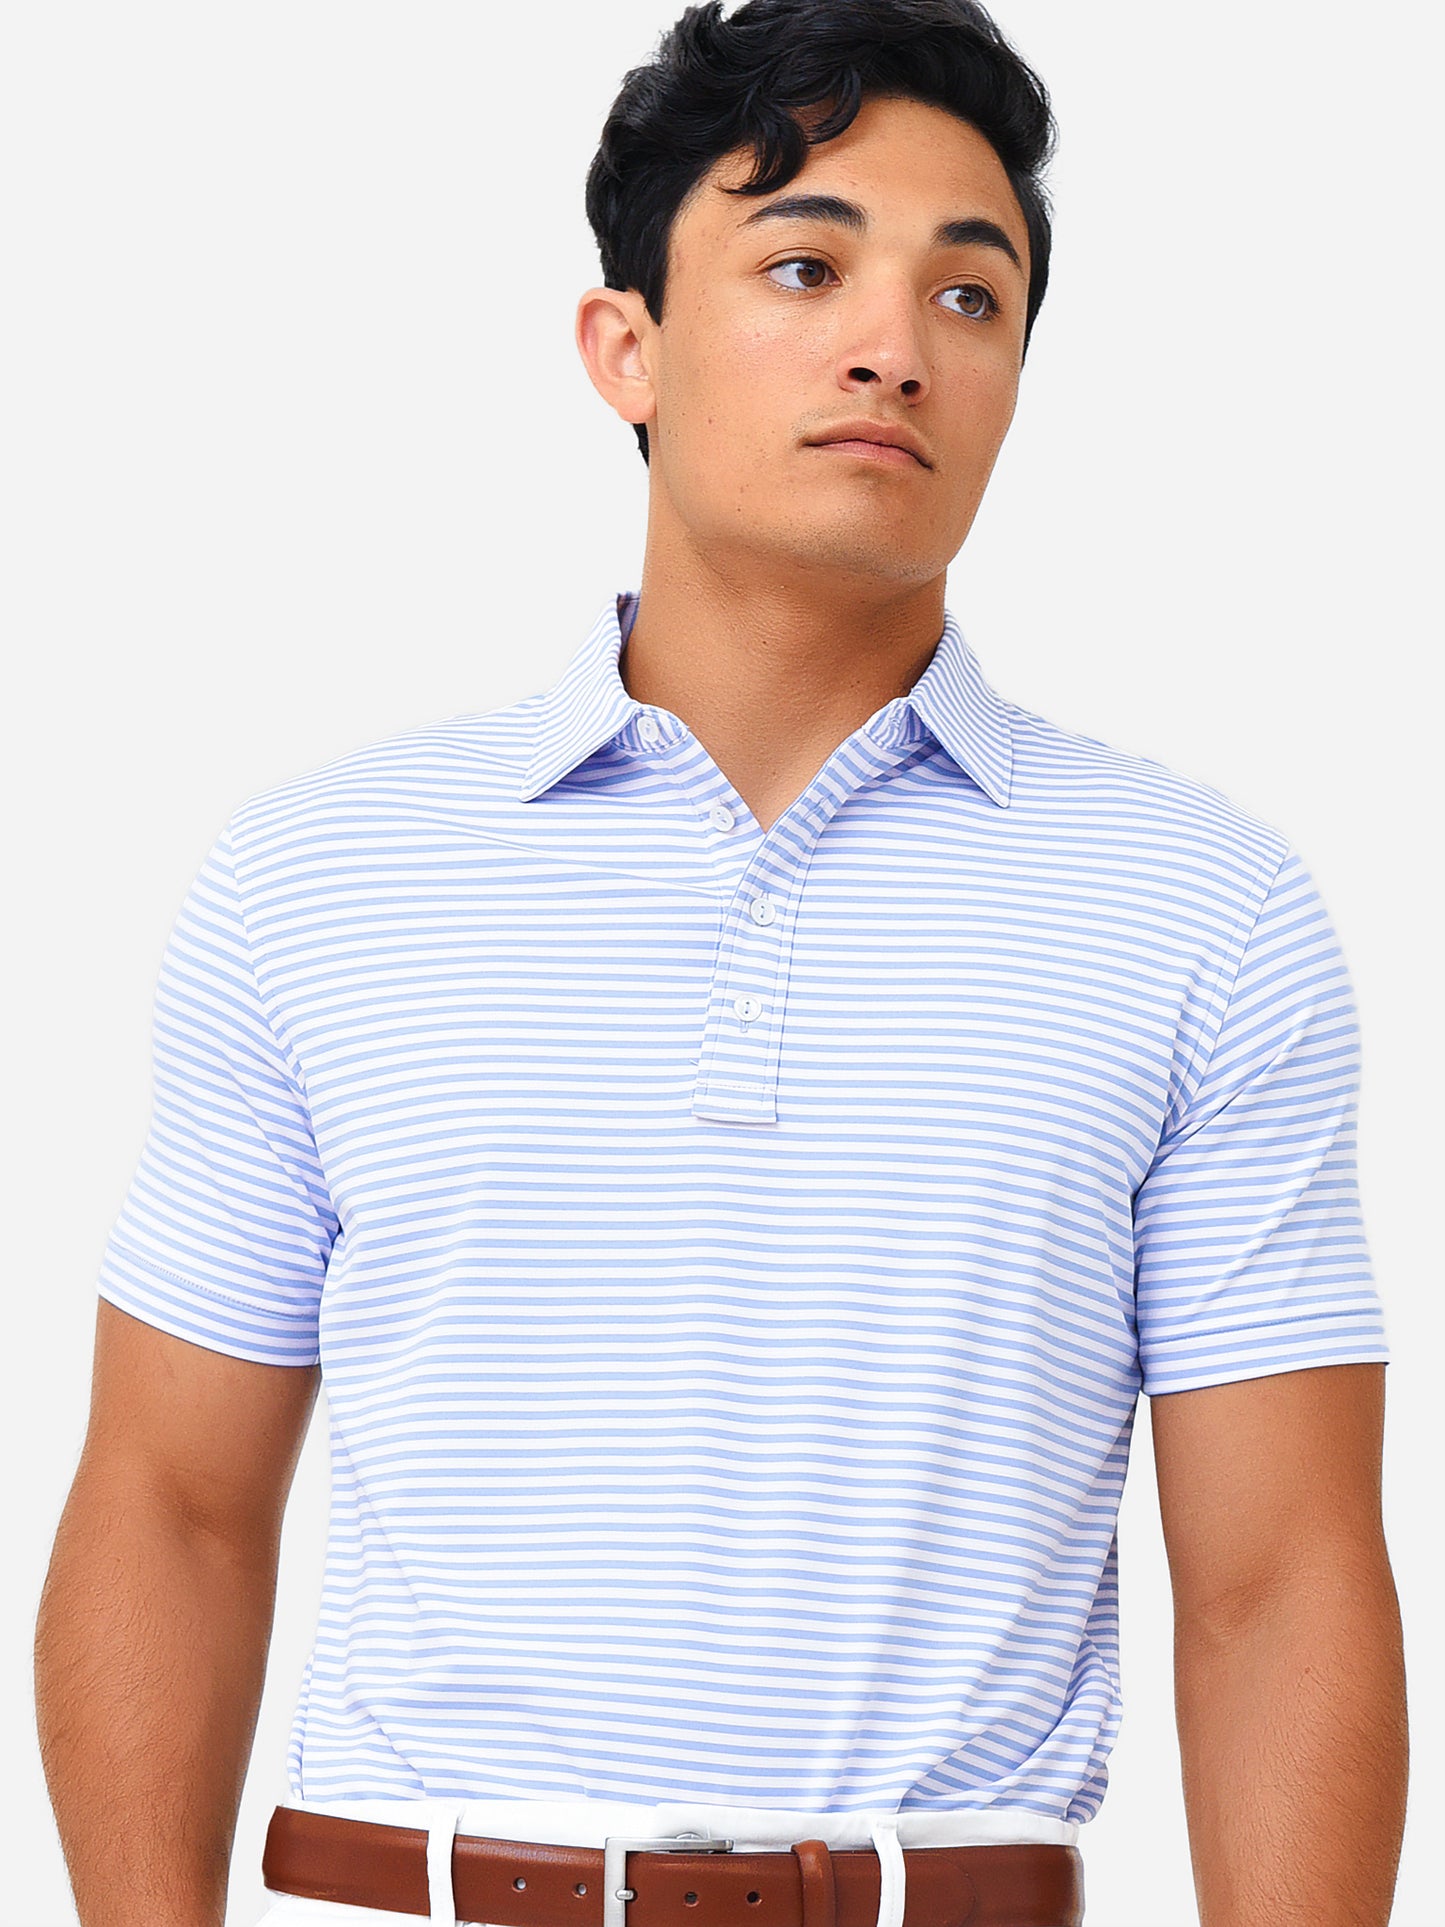 Peter Millar Crown Crafted Men's Music Performance Jersey Polo